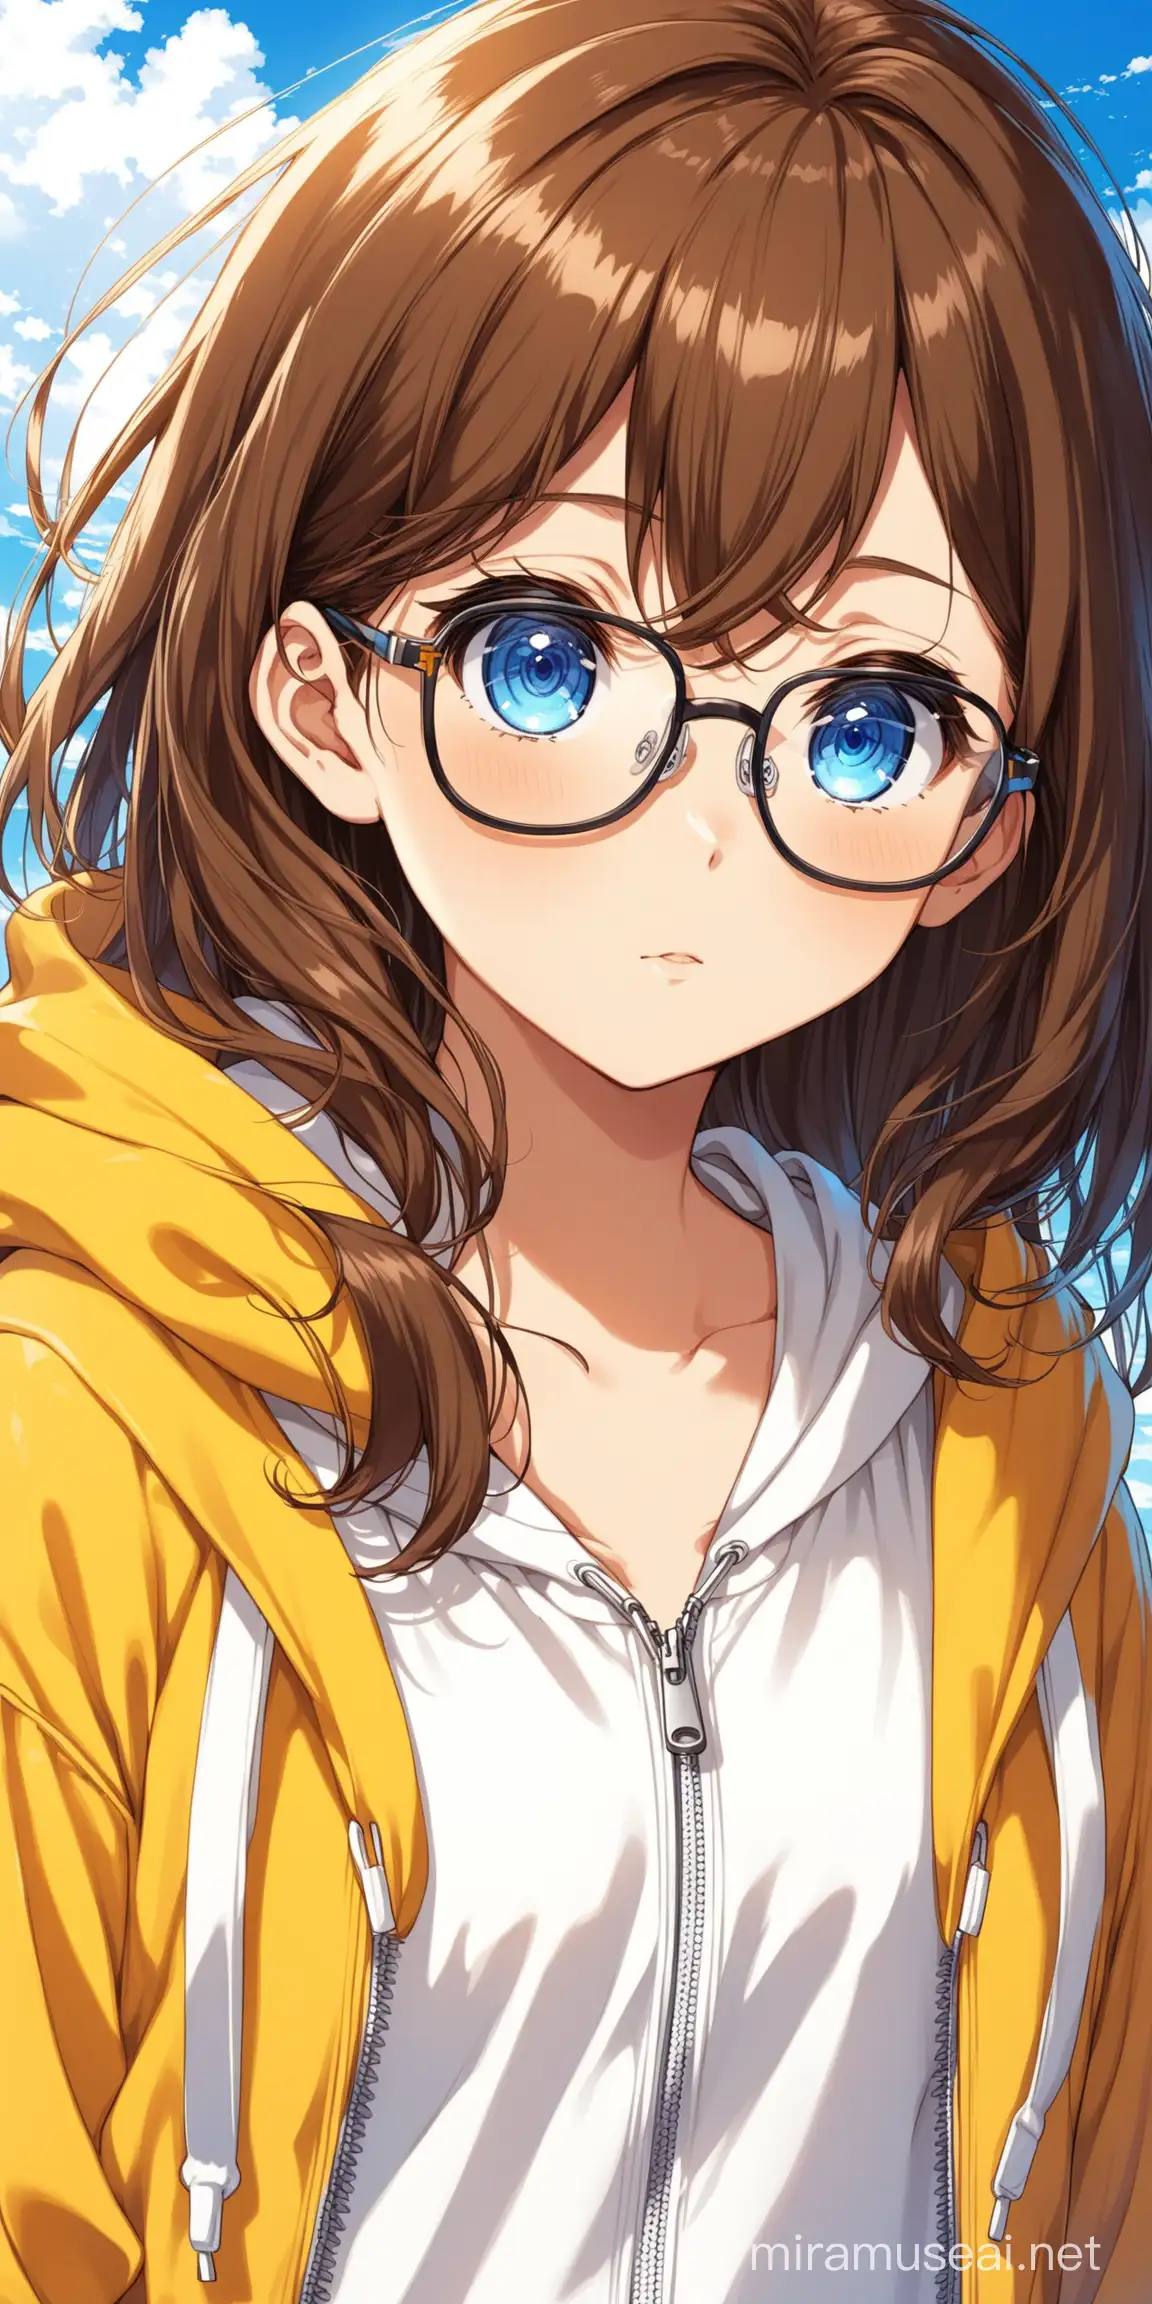 13 year old anime girl with glasses and messy brown hair and blue eyes wearing a yellow zip up hoodie and a white sundress.